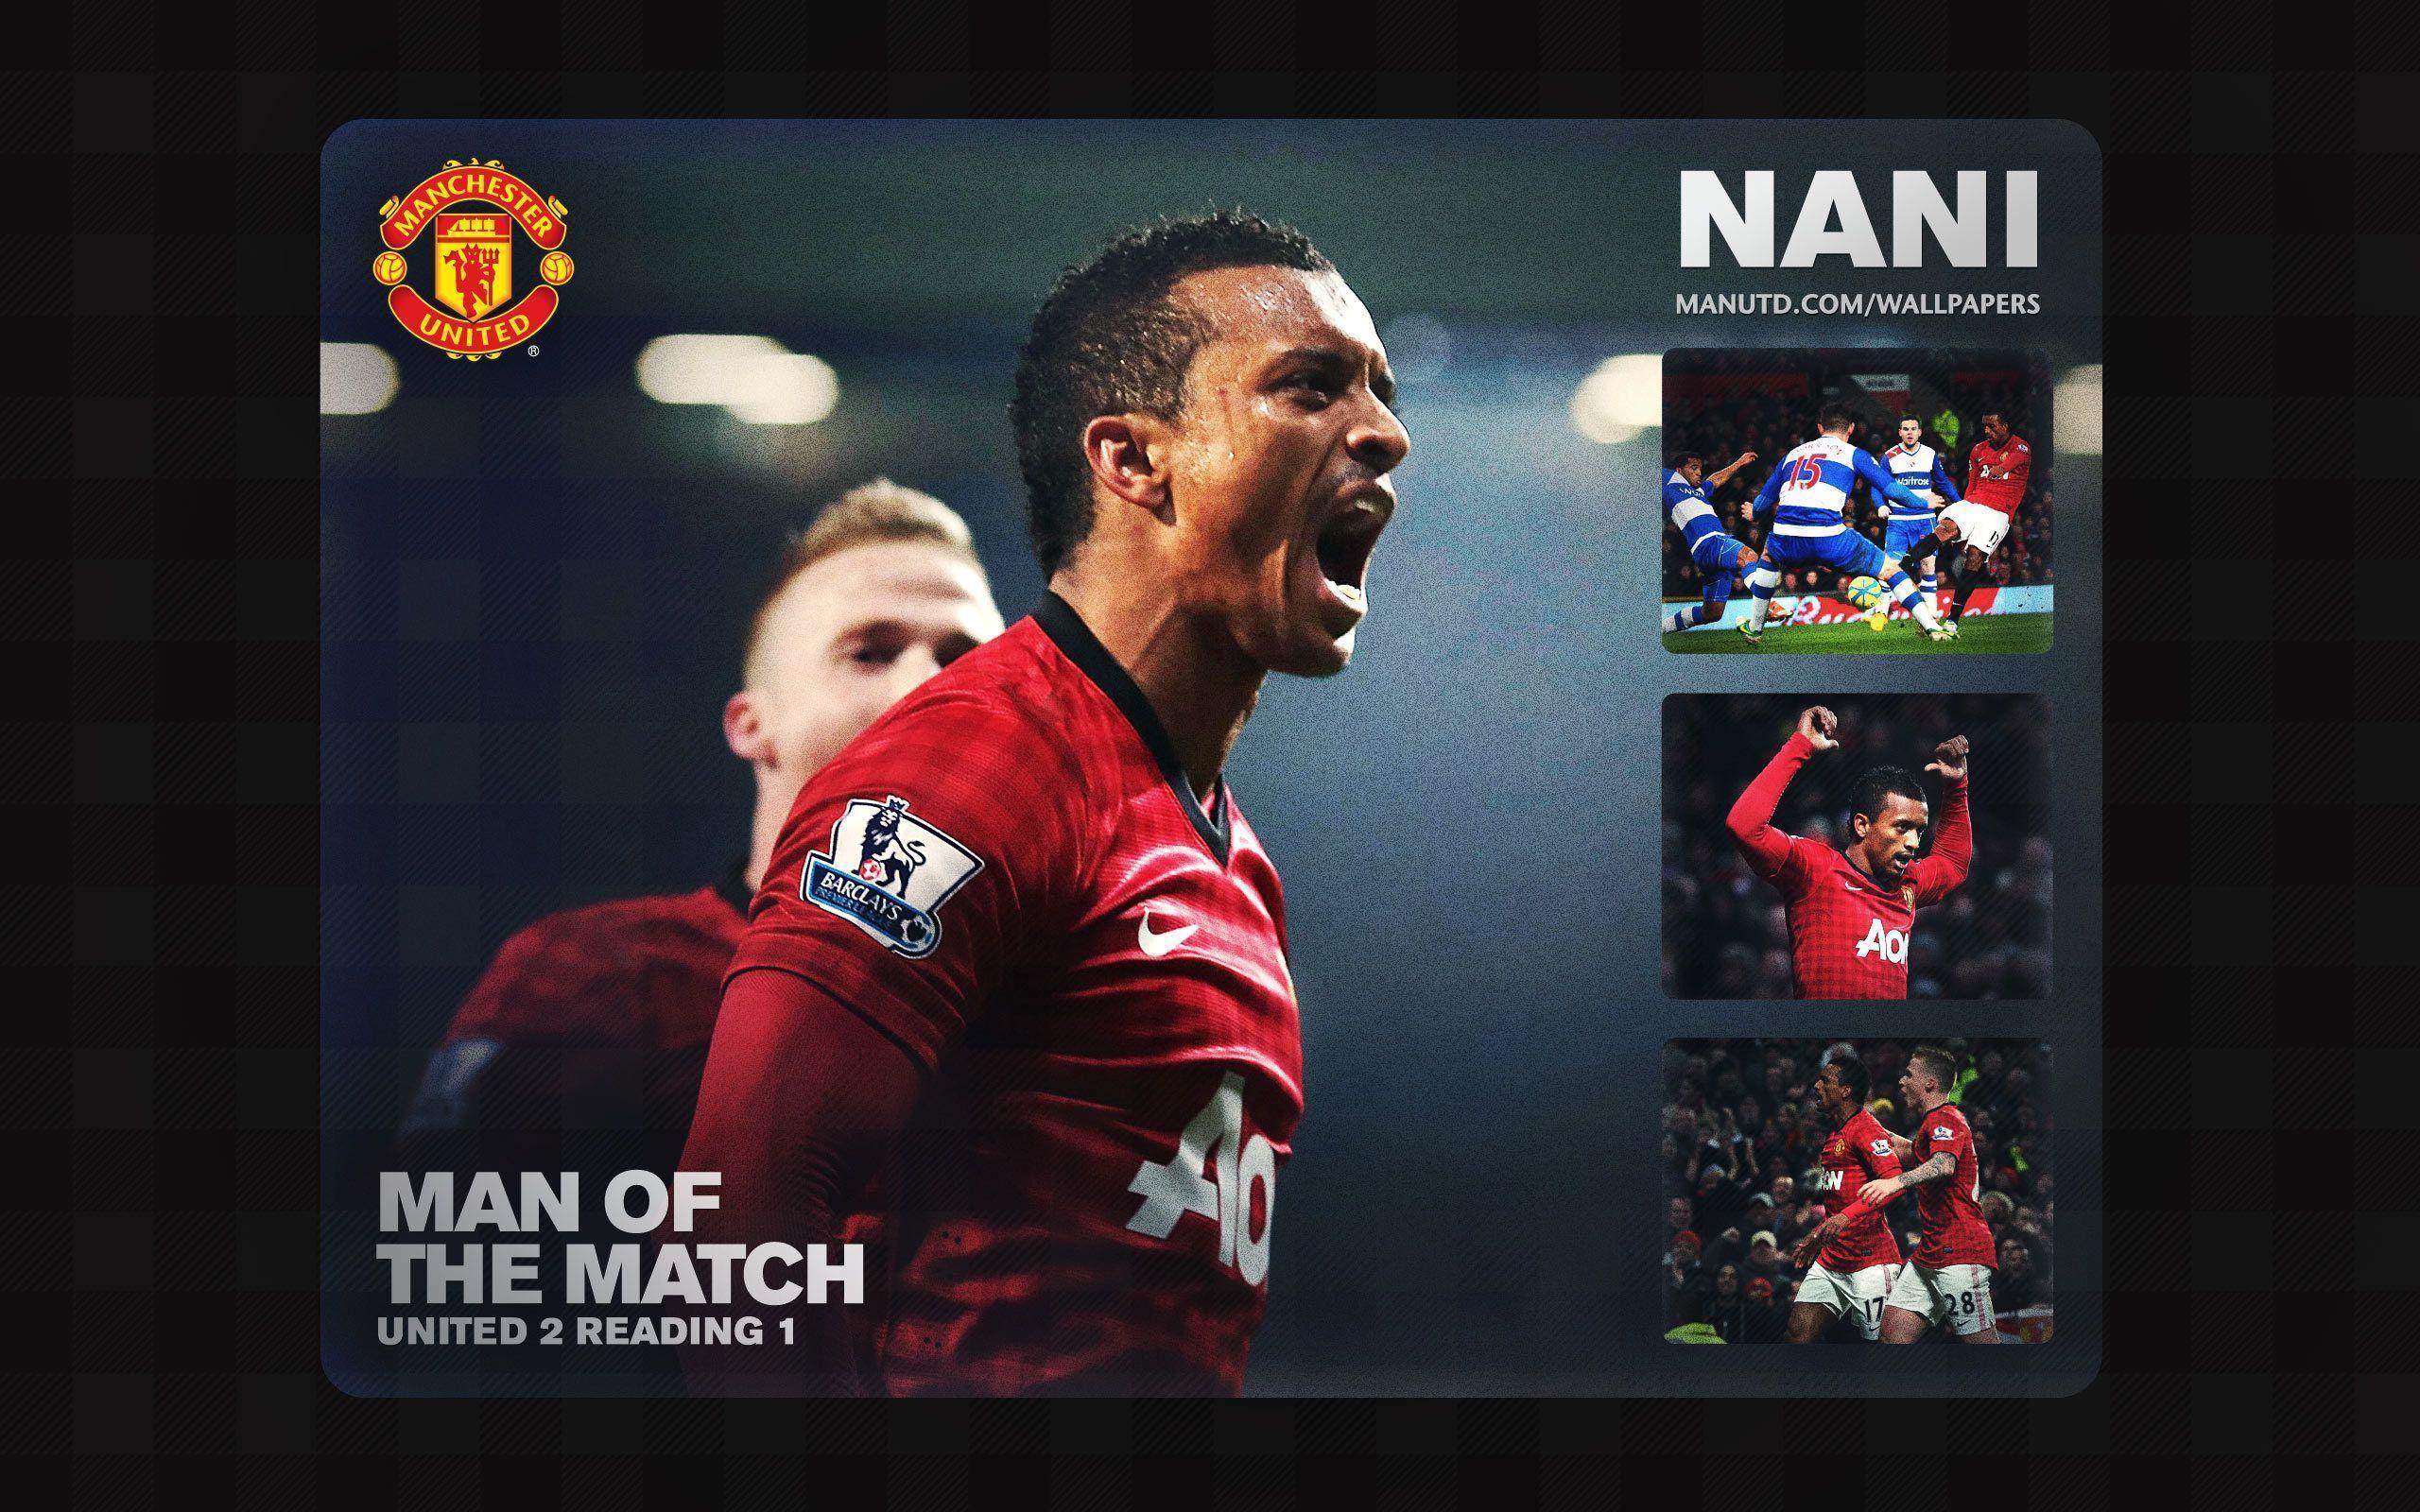 The football player of Manchester United Luis Nani is a man